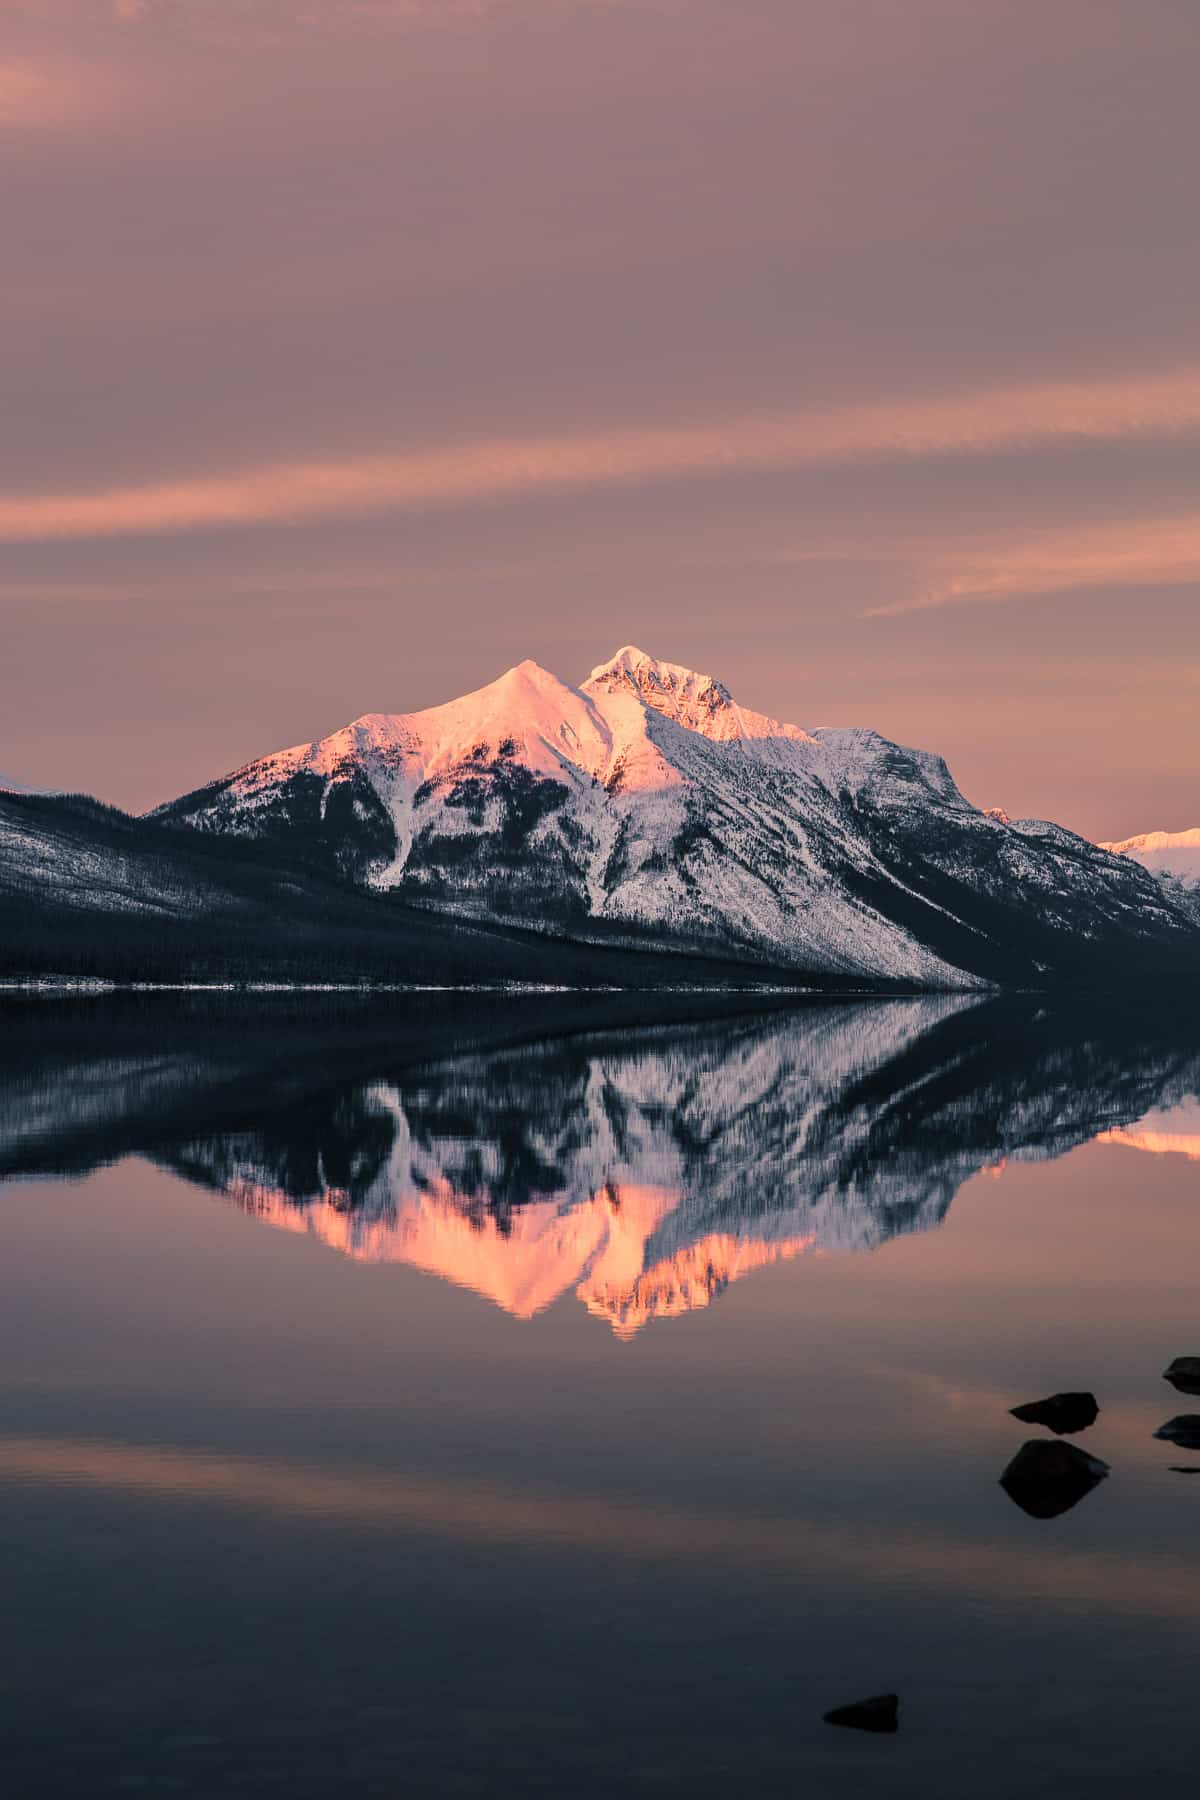 Mountain reflecting into a lake with a light pink sunset glow.